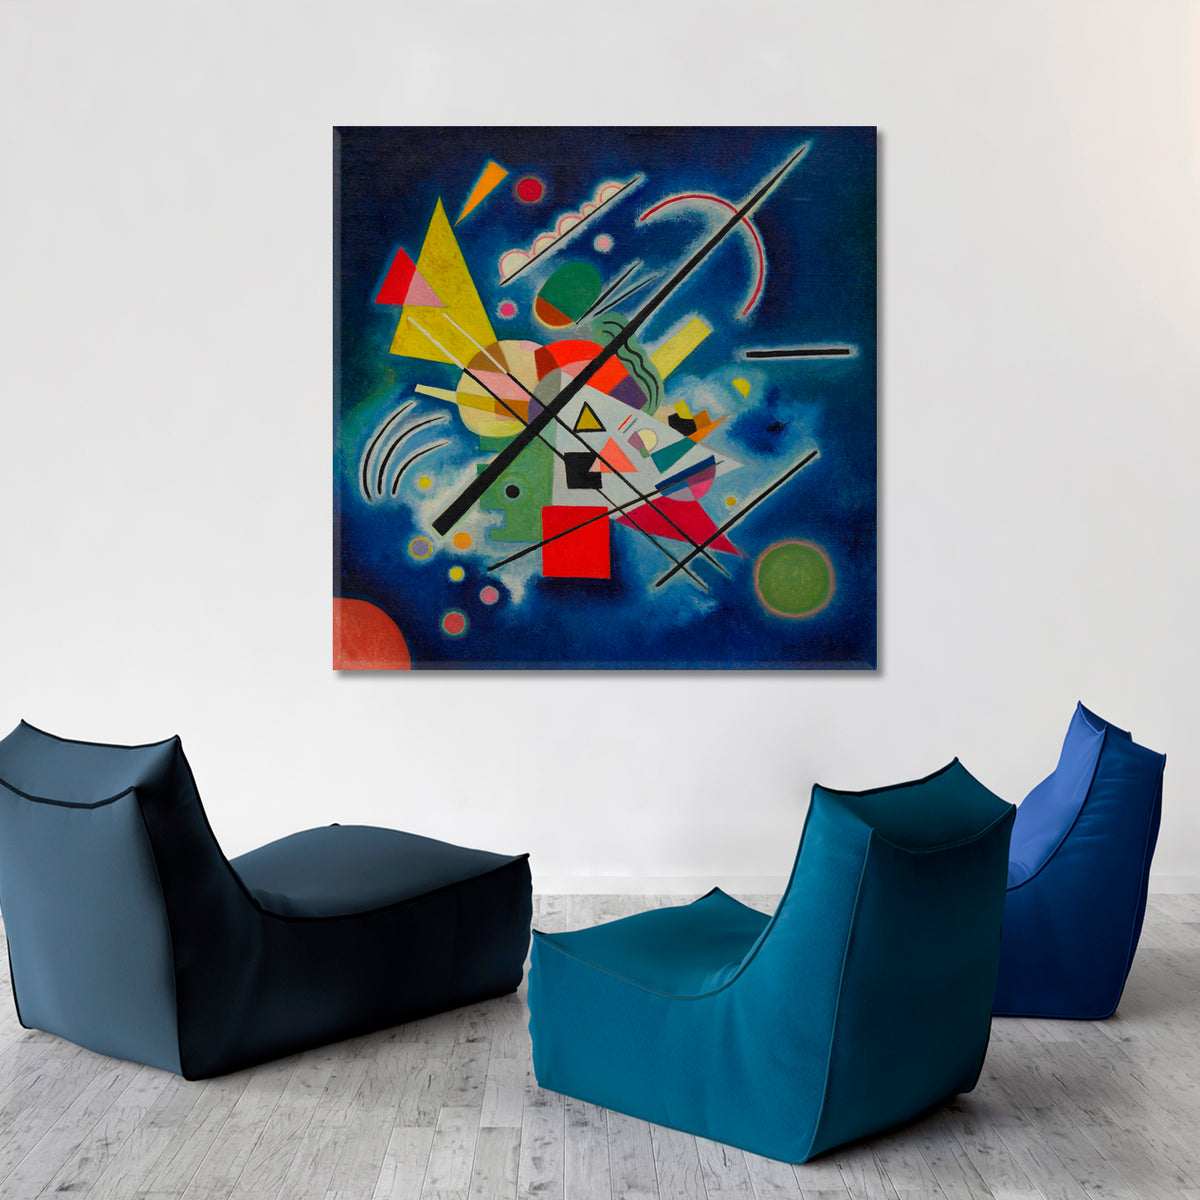 Kandinsky's Motives Abstract Figurative Contemporary Painting Abstract Art Print Artesty 1 Panel 12"x12" 